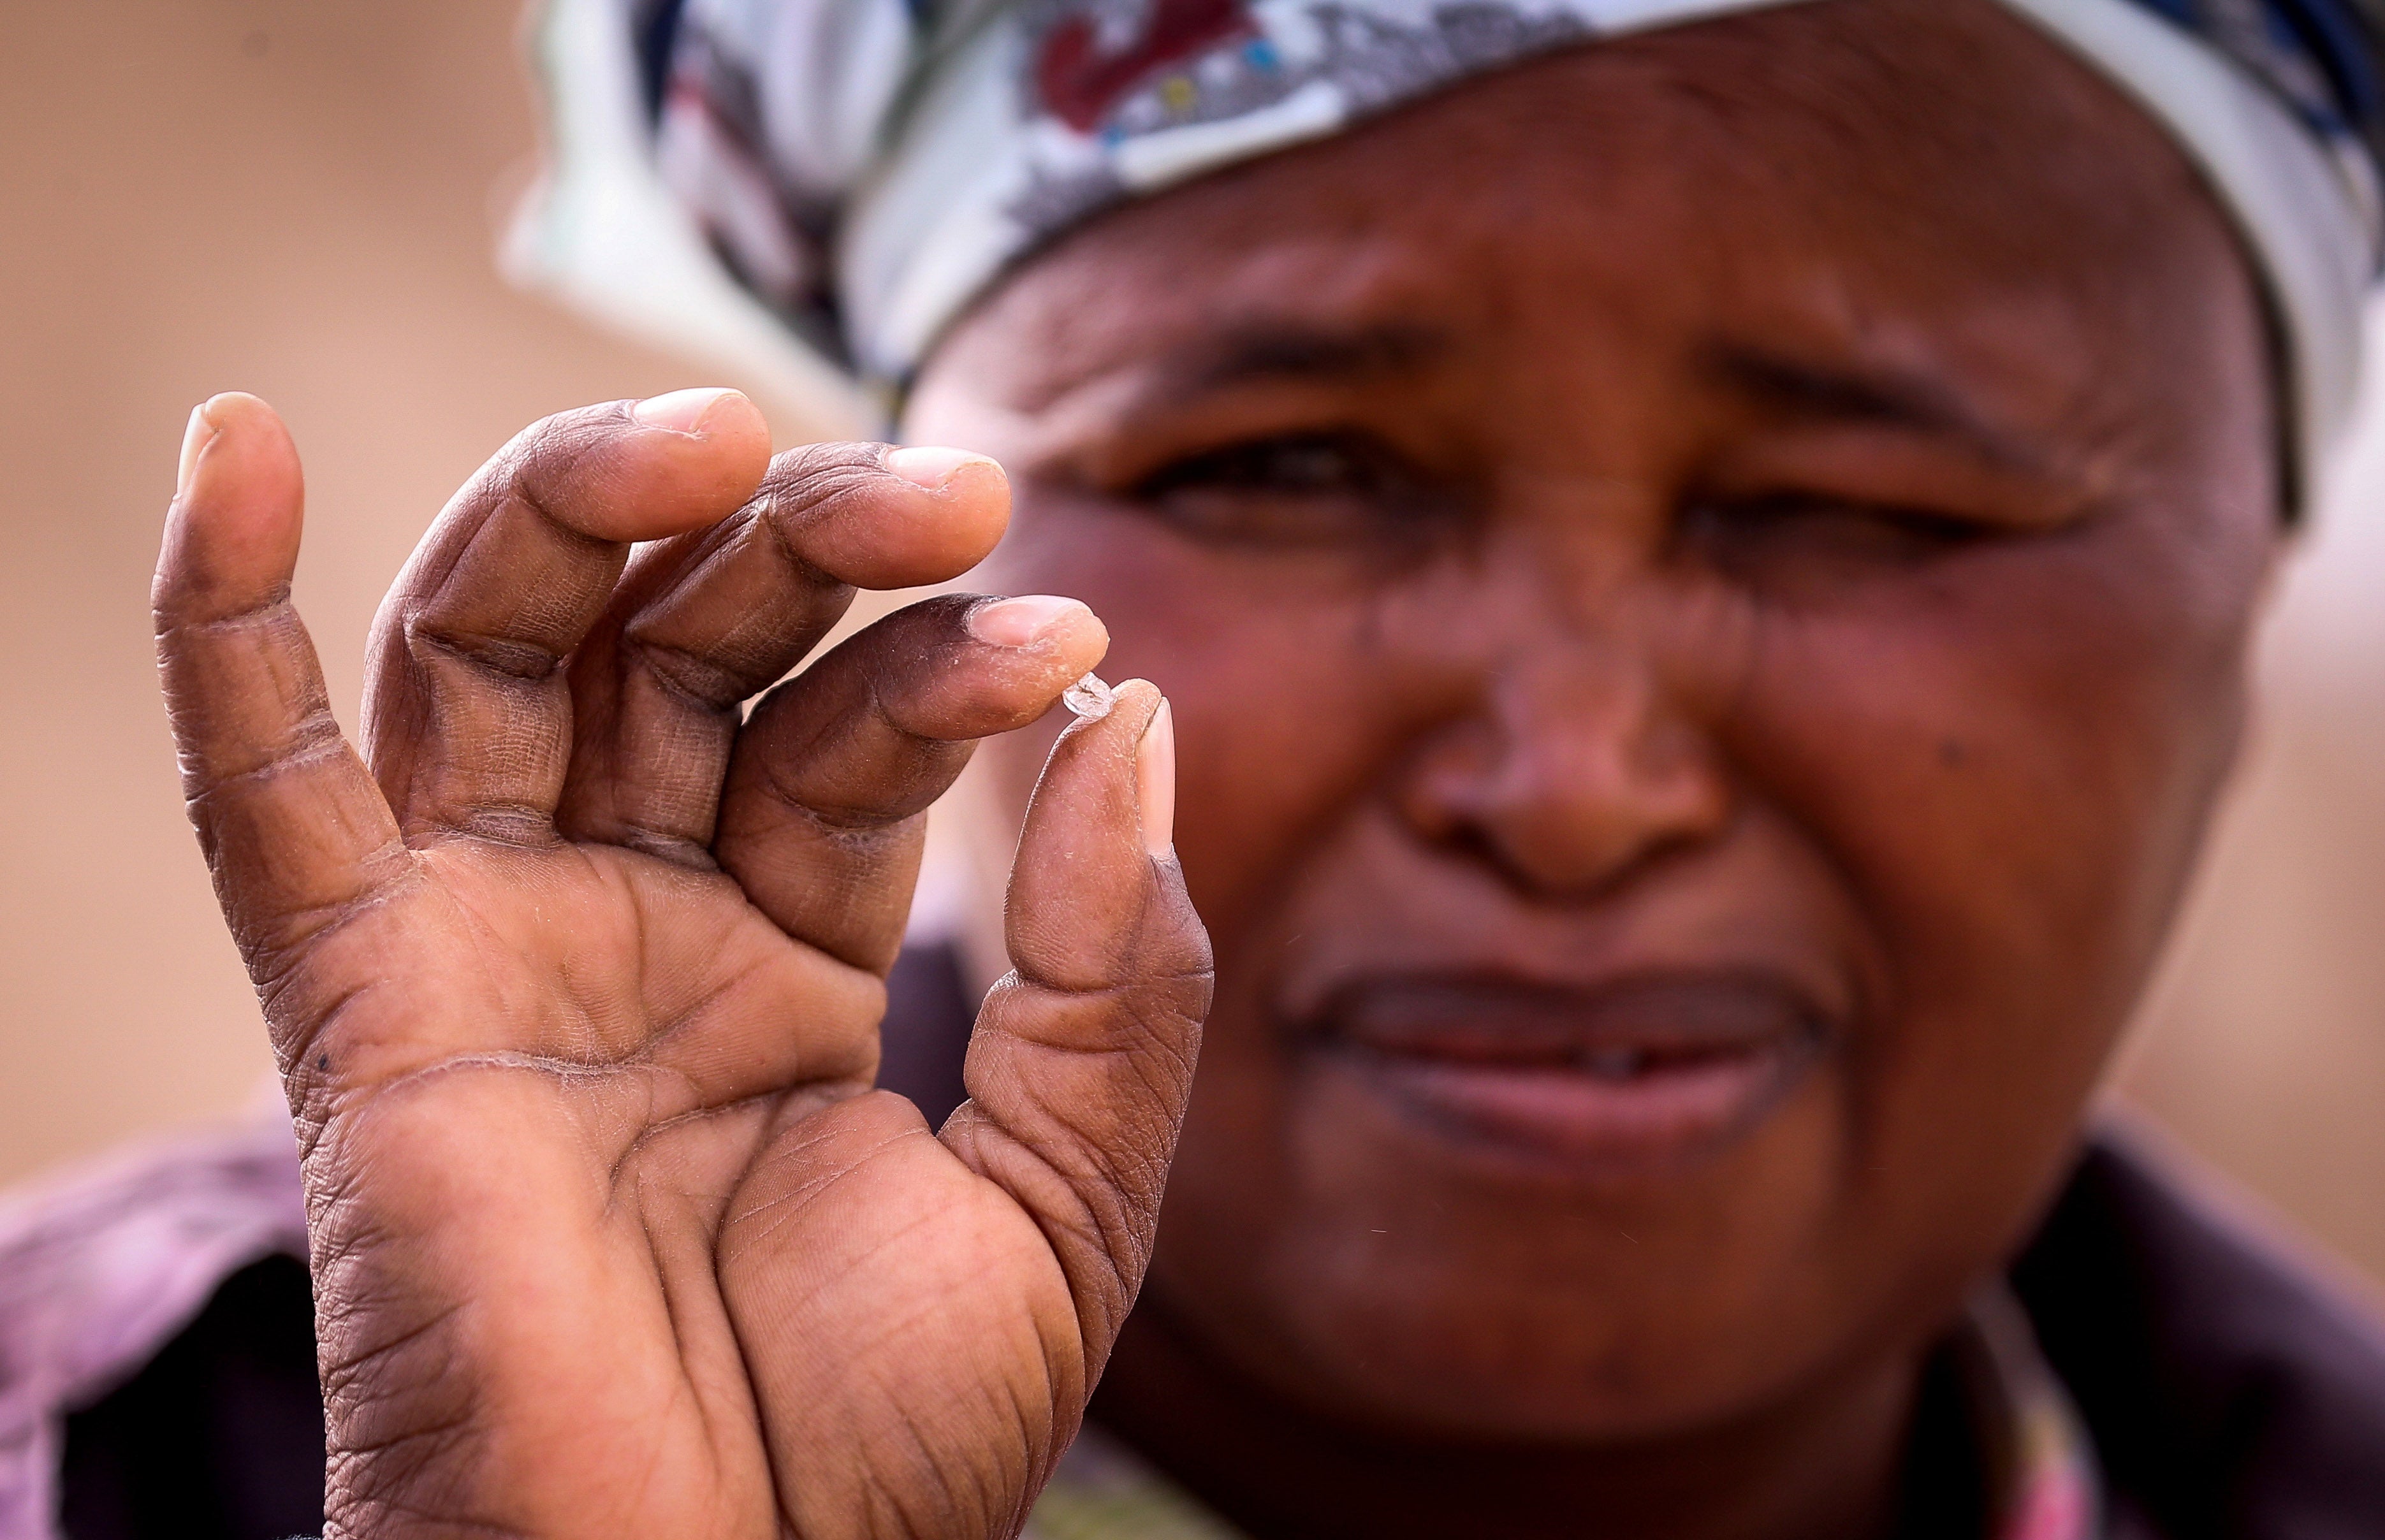 A woman squints while holding a small diamond in her fingers